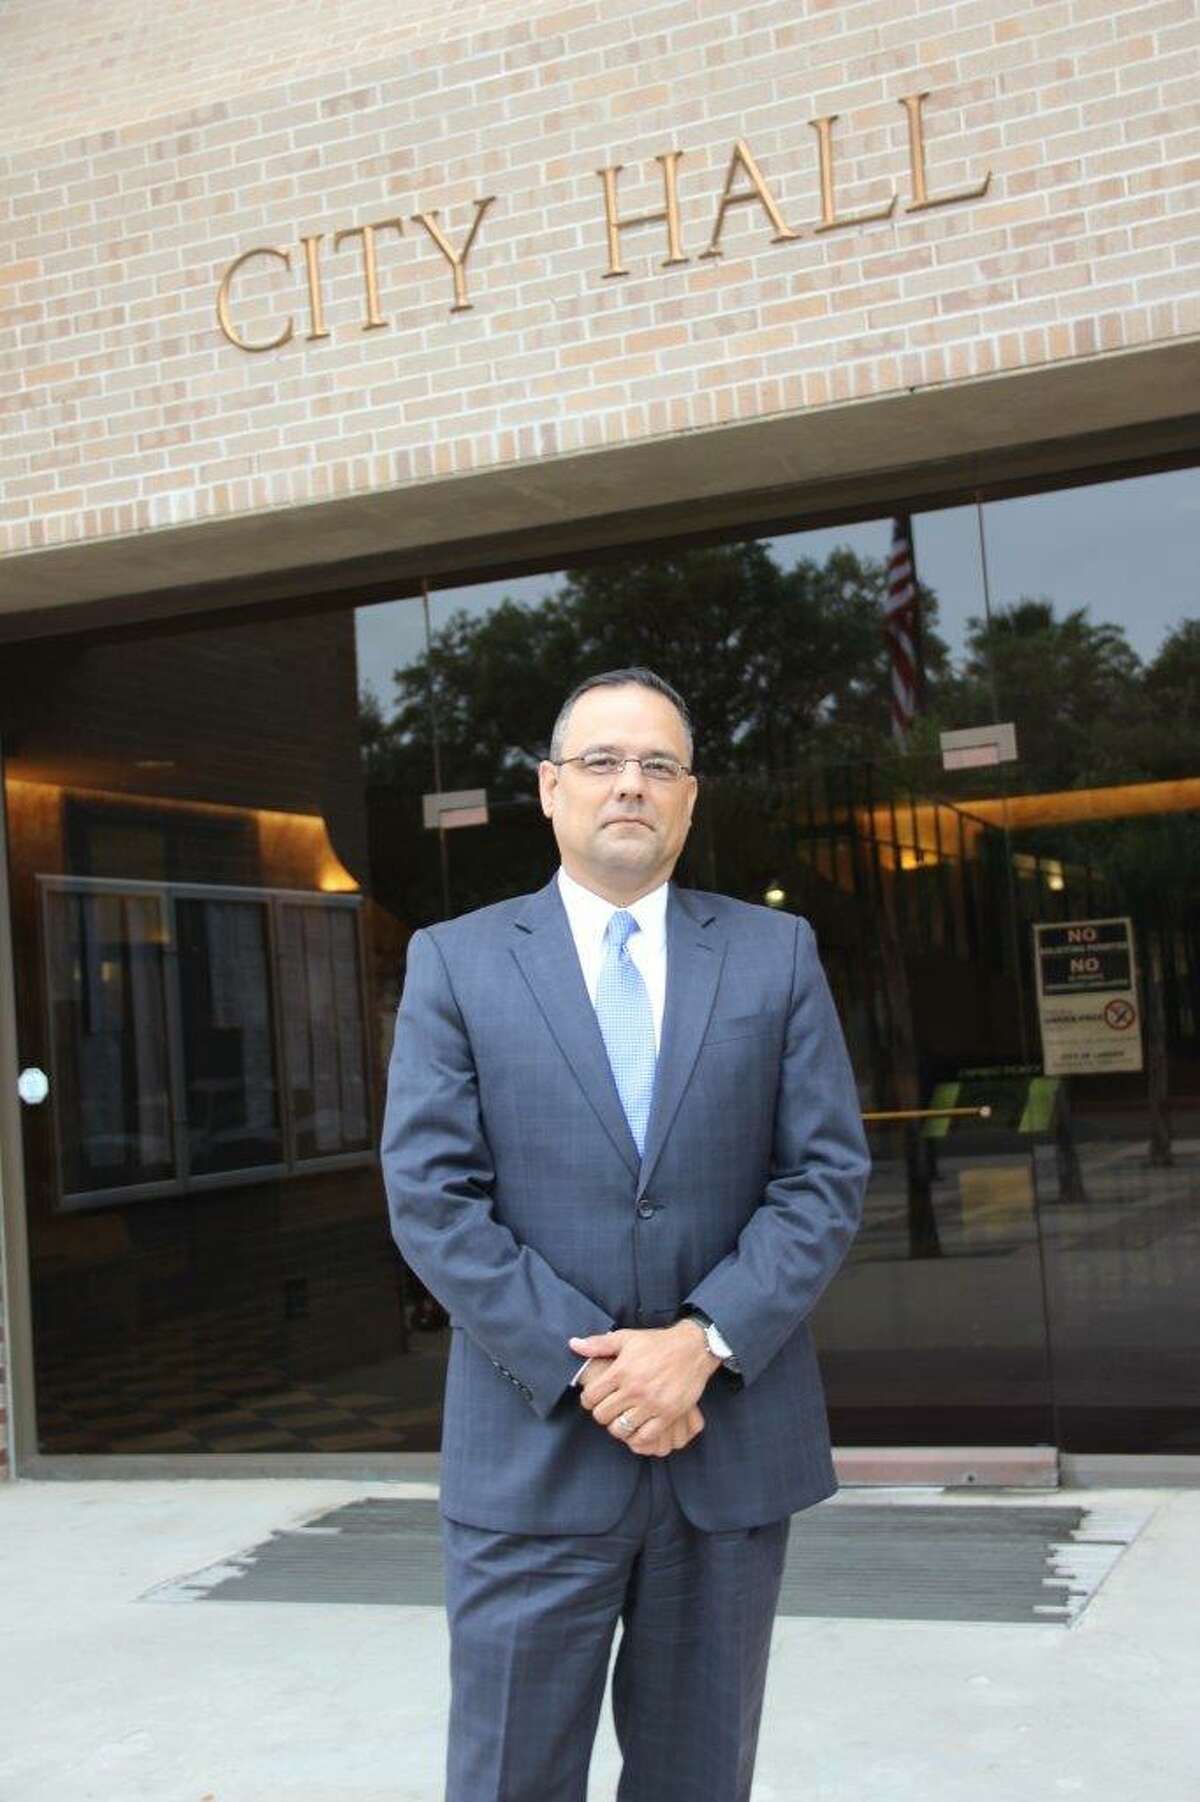 The Laredo City Manager Search Ad-Hoc Committee has ranked Robert Eads first out of four applicants who applied for the open Laredo City Manager position, according to a source.